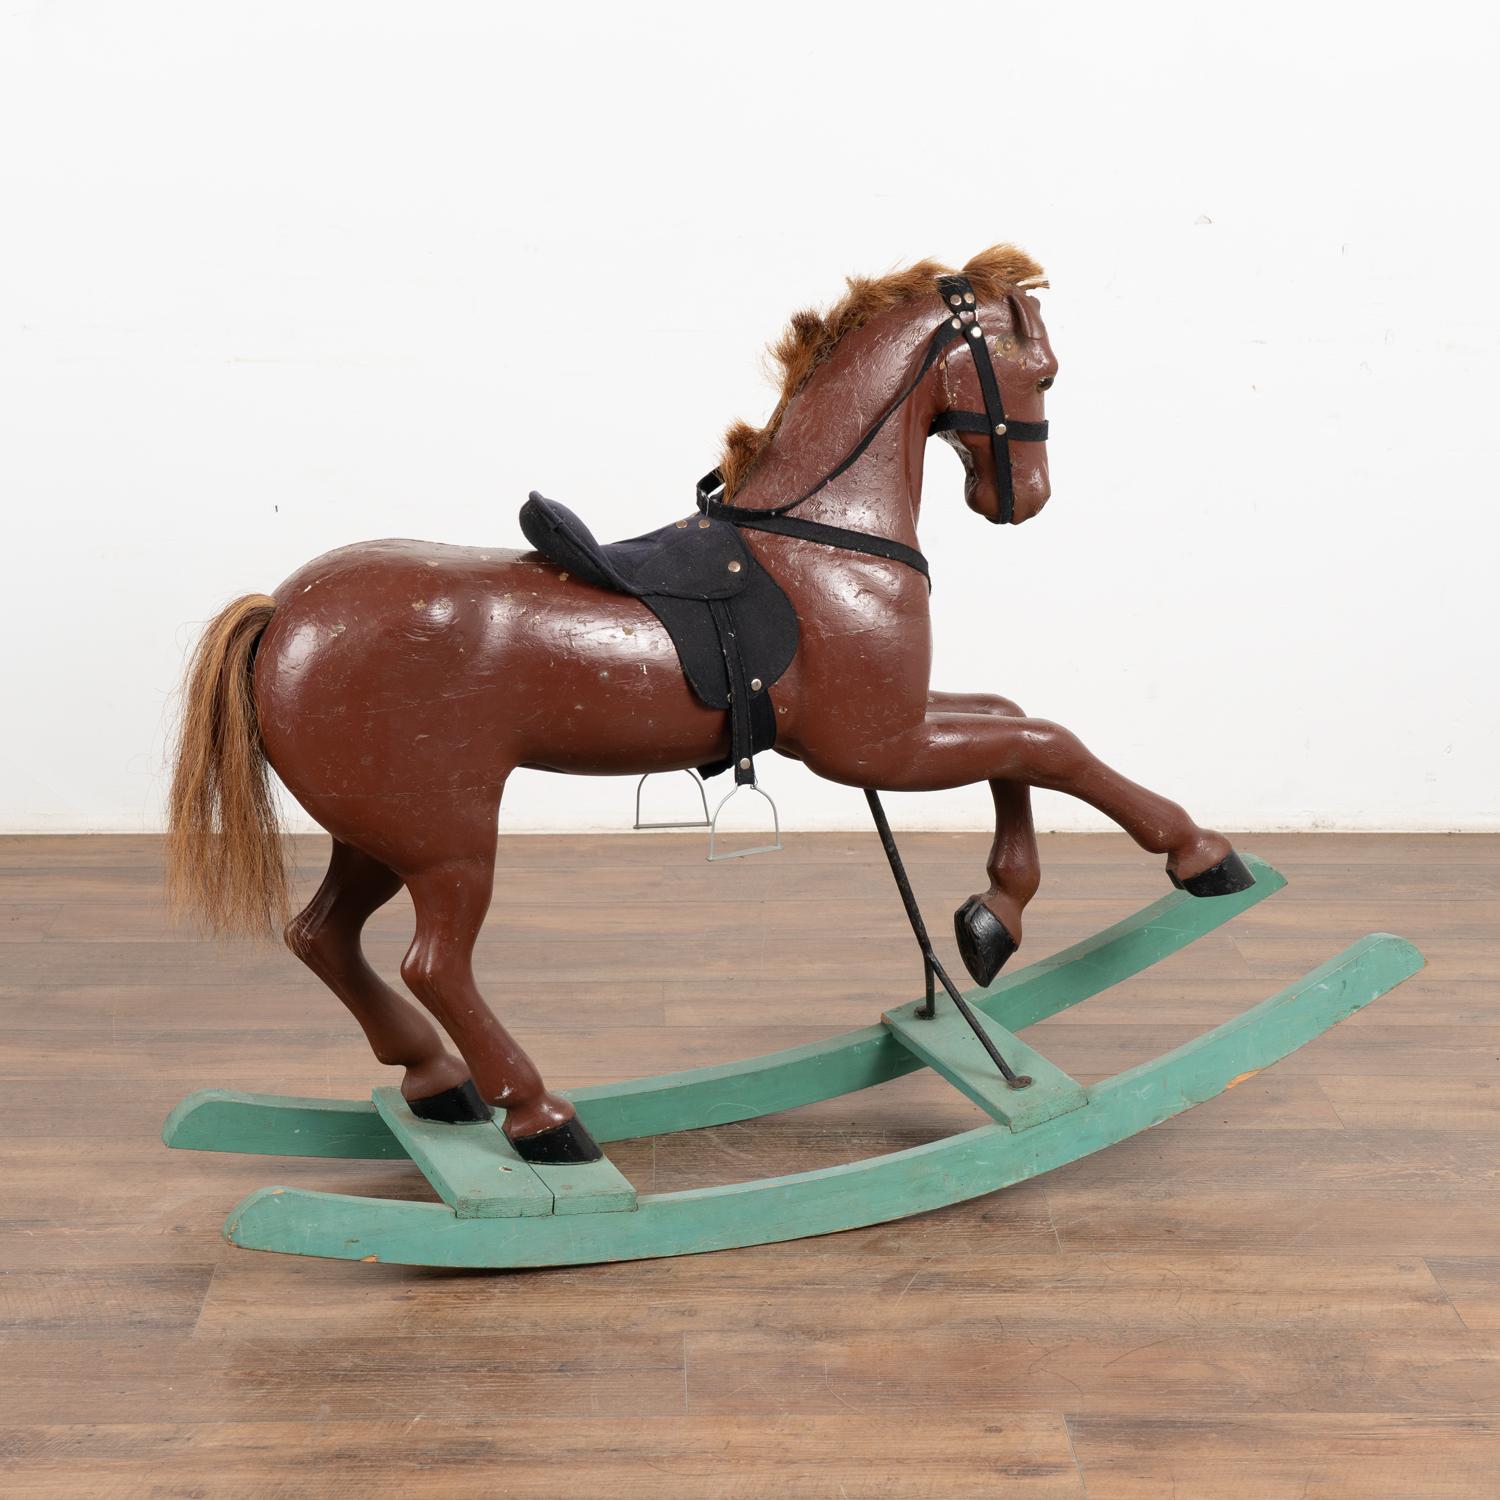 It is the worn look that creates the wonderful appeal of this original painted and carved rocking horse from Sweden.
The brown/brick red paint has been distressed through years of use; see cracks, chips, dings some wear down to natural pine below.